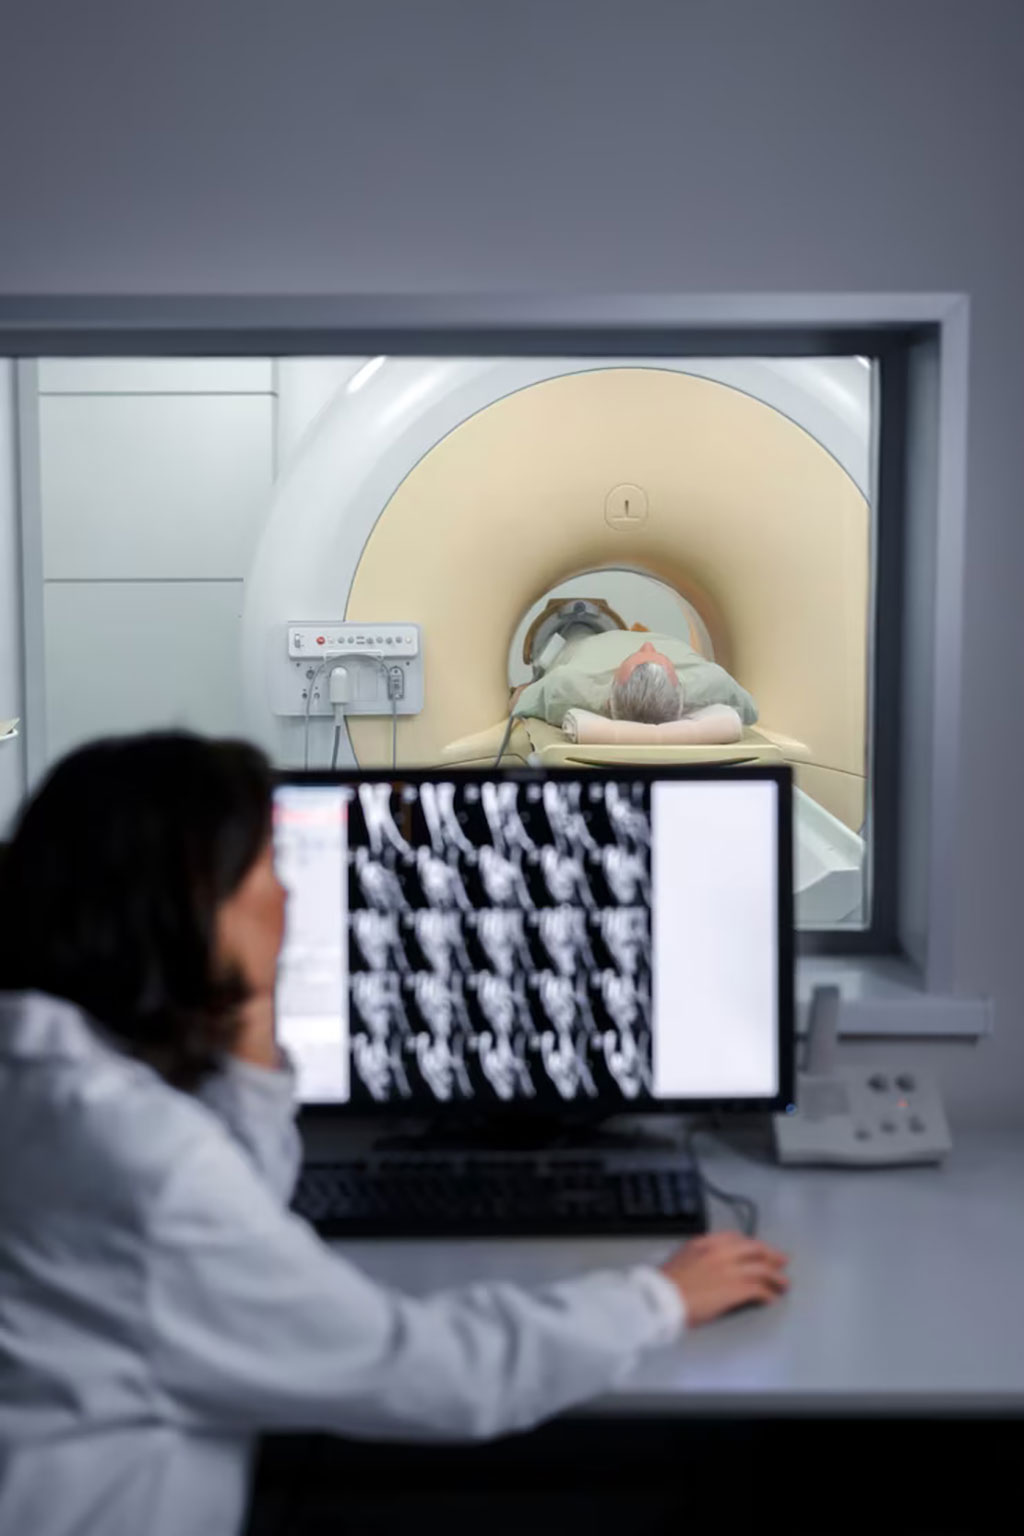 Image: Copper could help create clearer MRI images and improve diagnosis (Photo courtesy of Freepik)